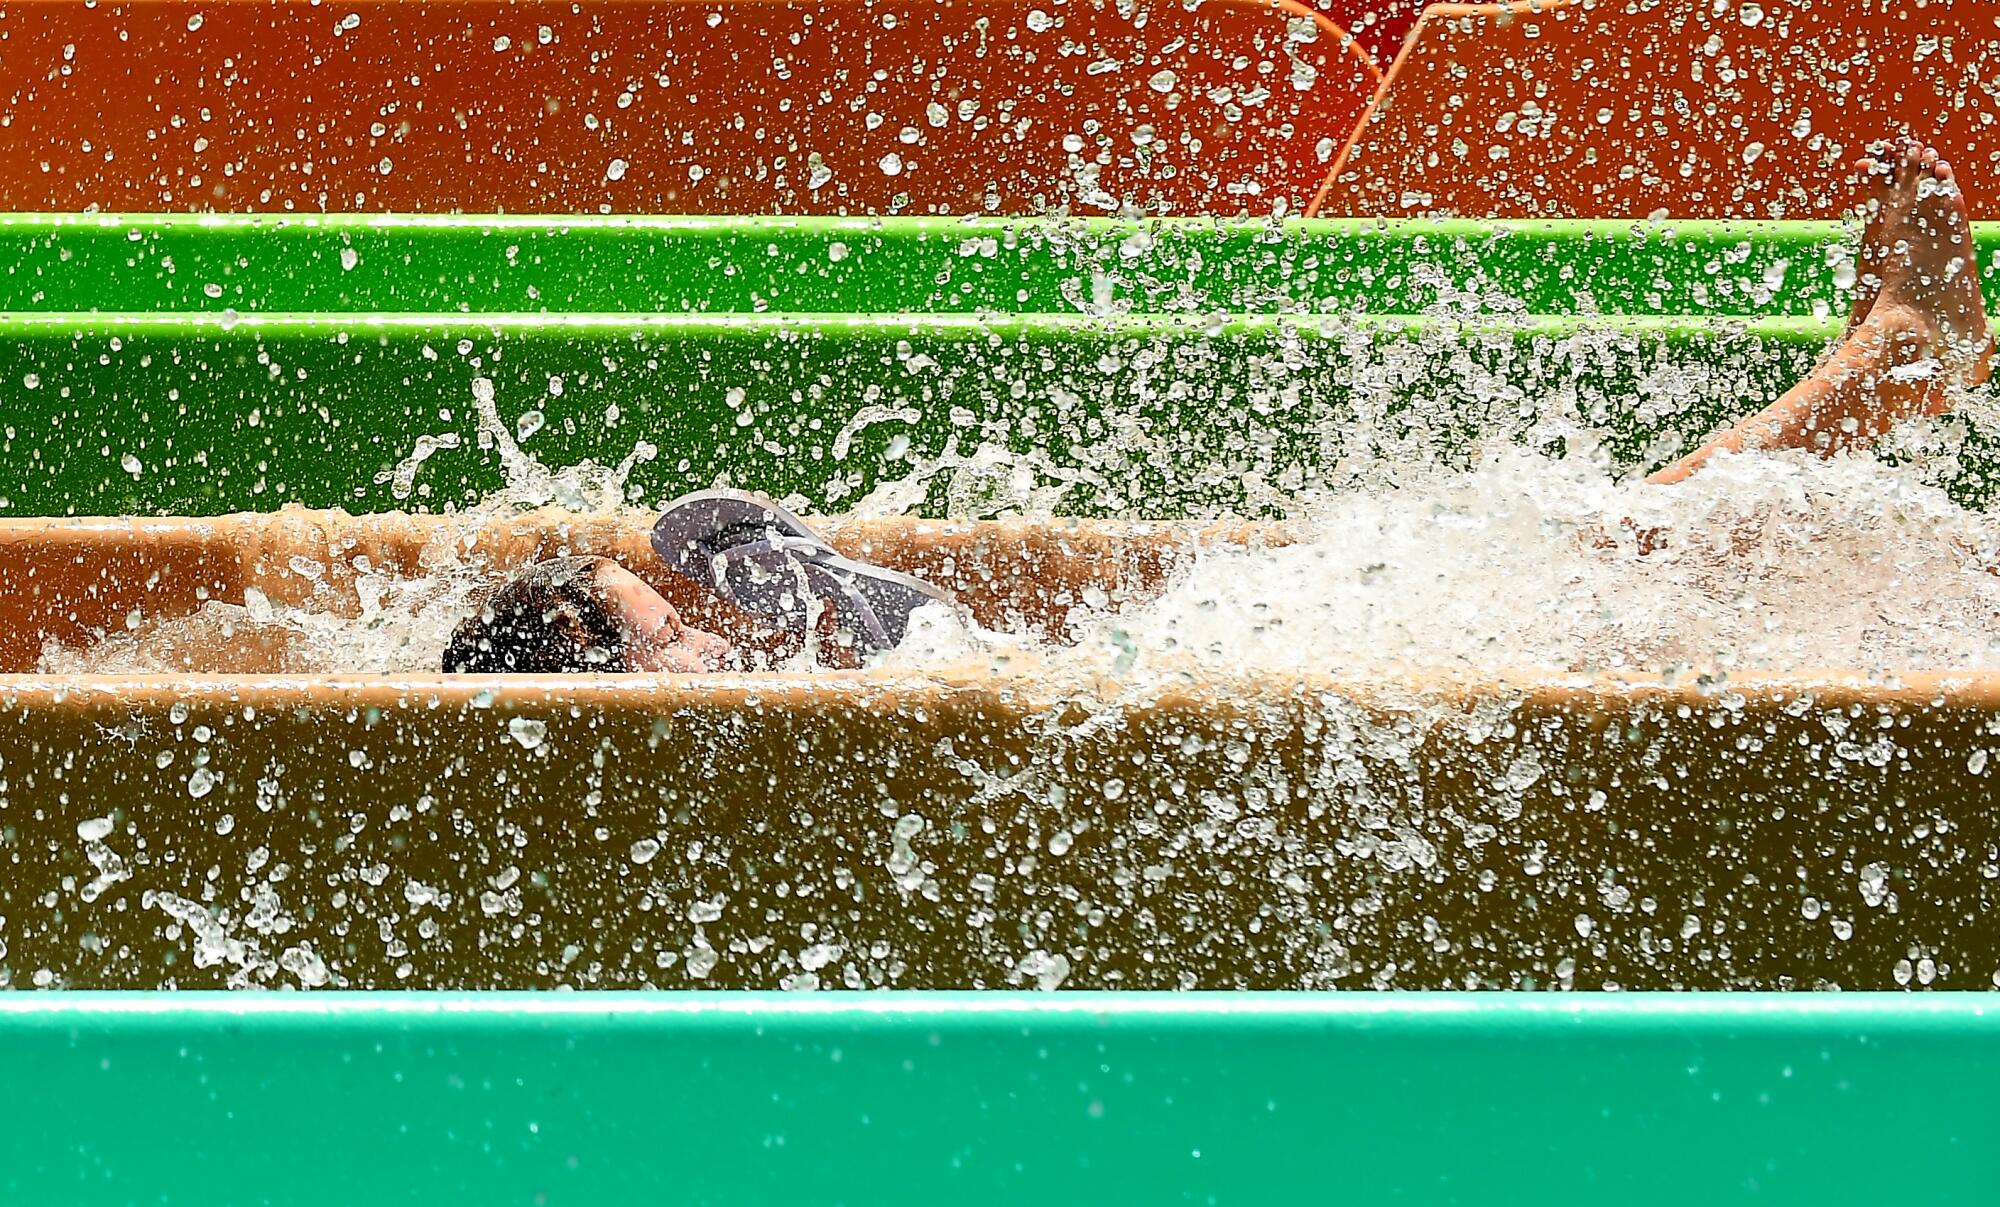 A person splashes at the end of a waterslide ride